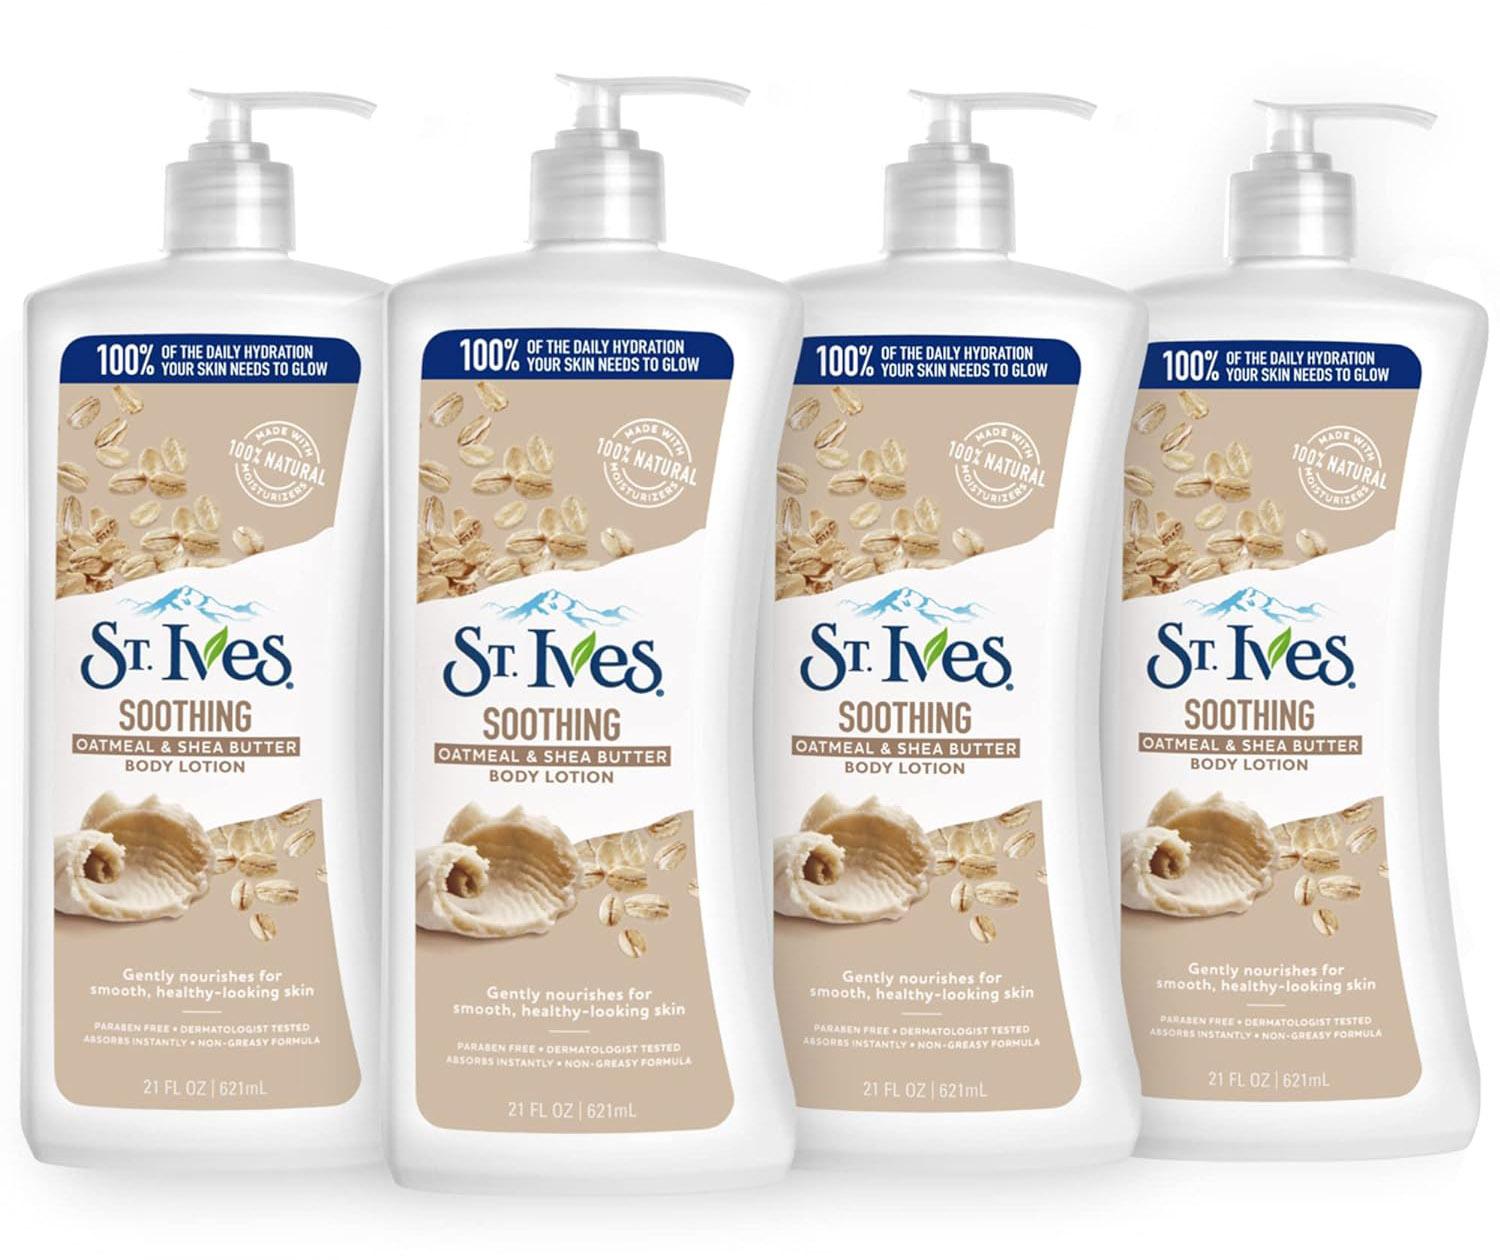 St Ives Soothing Hand and Body Lotion Oatmeal and Shea Butter for $12.77